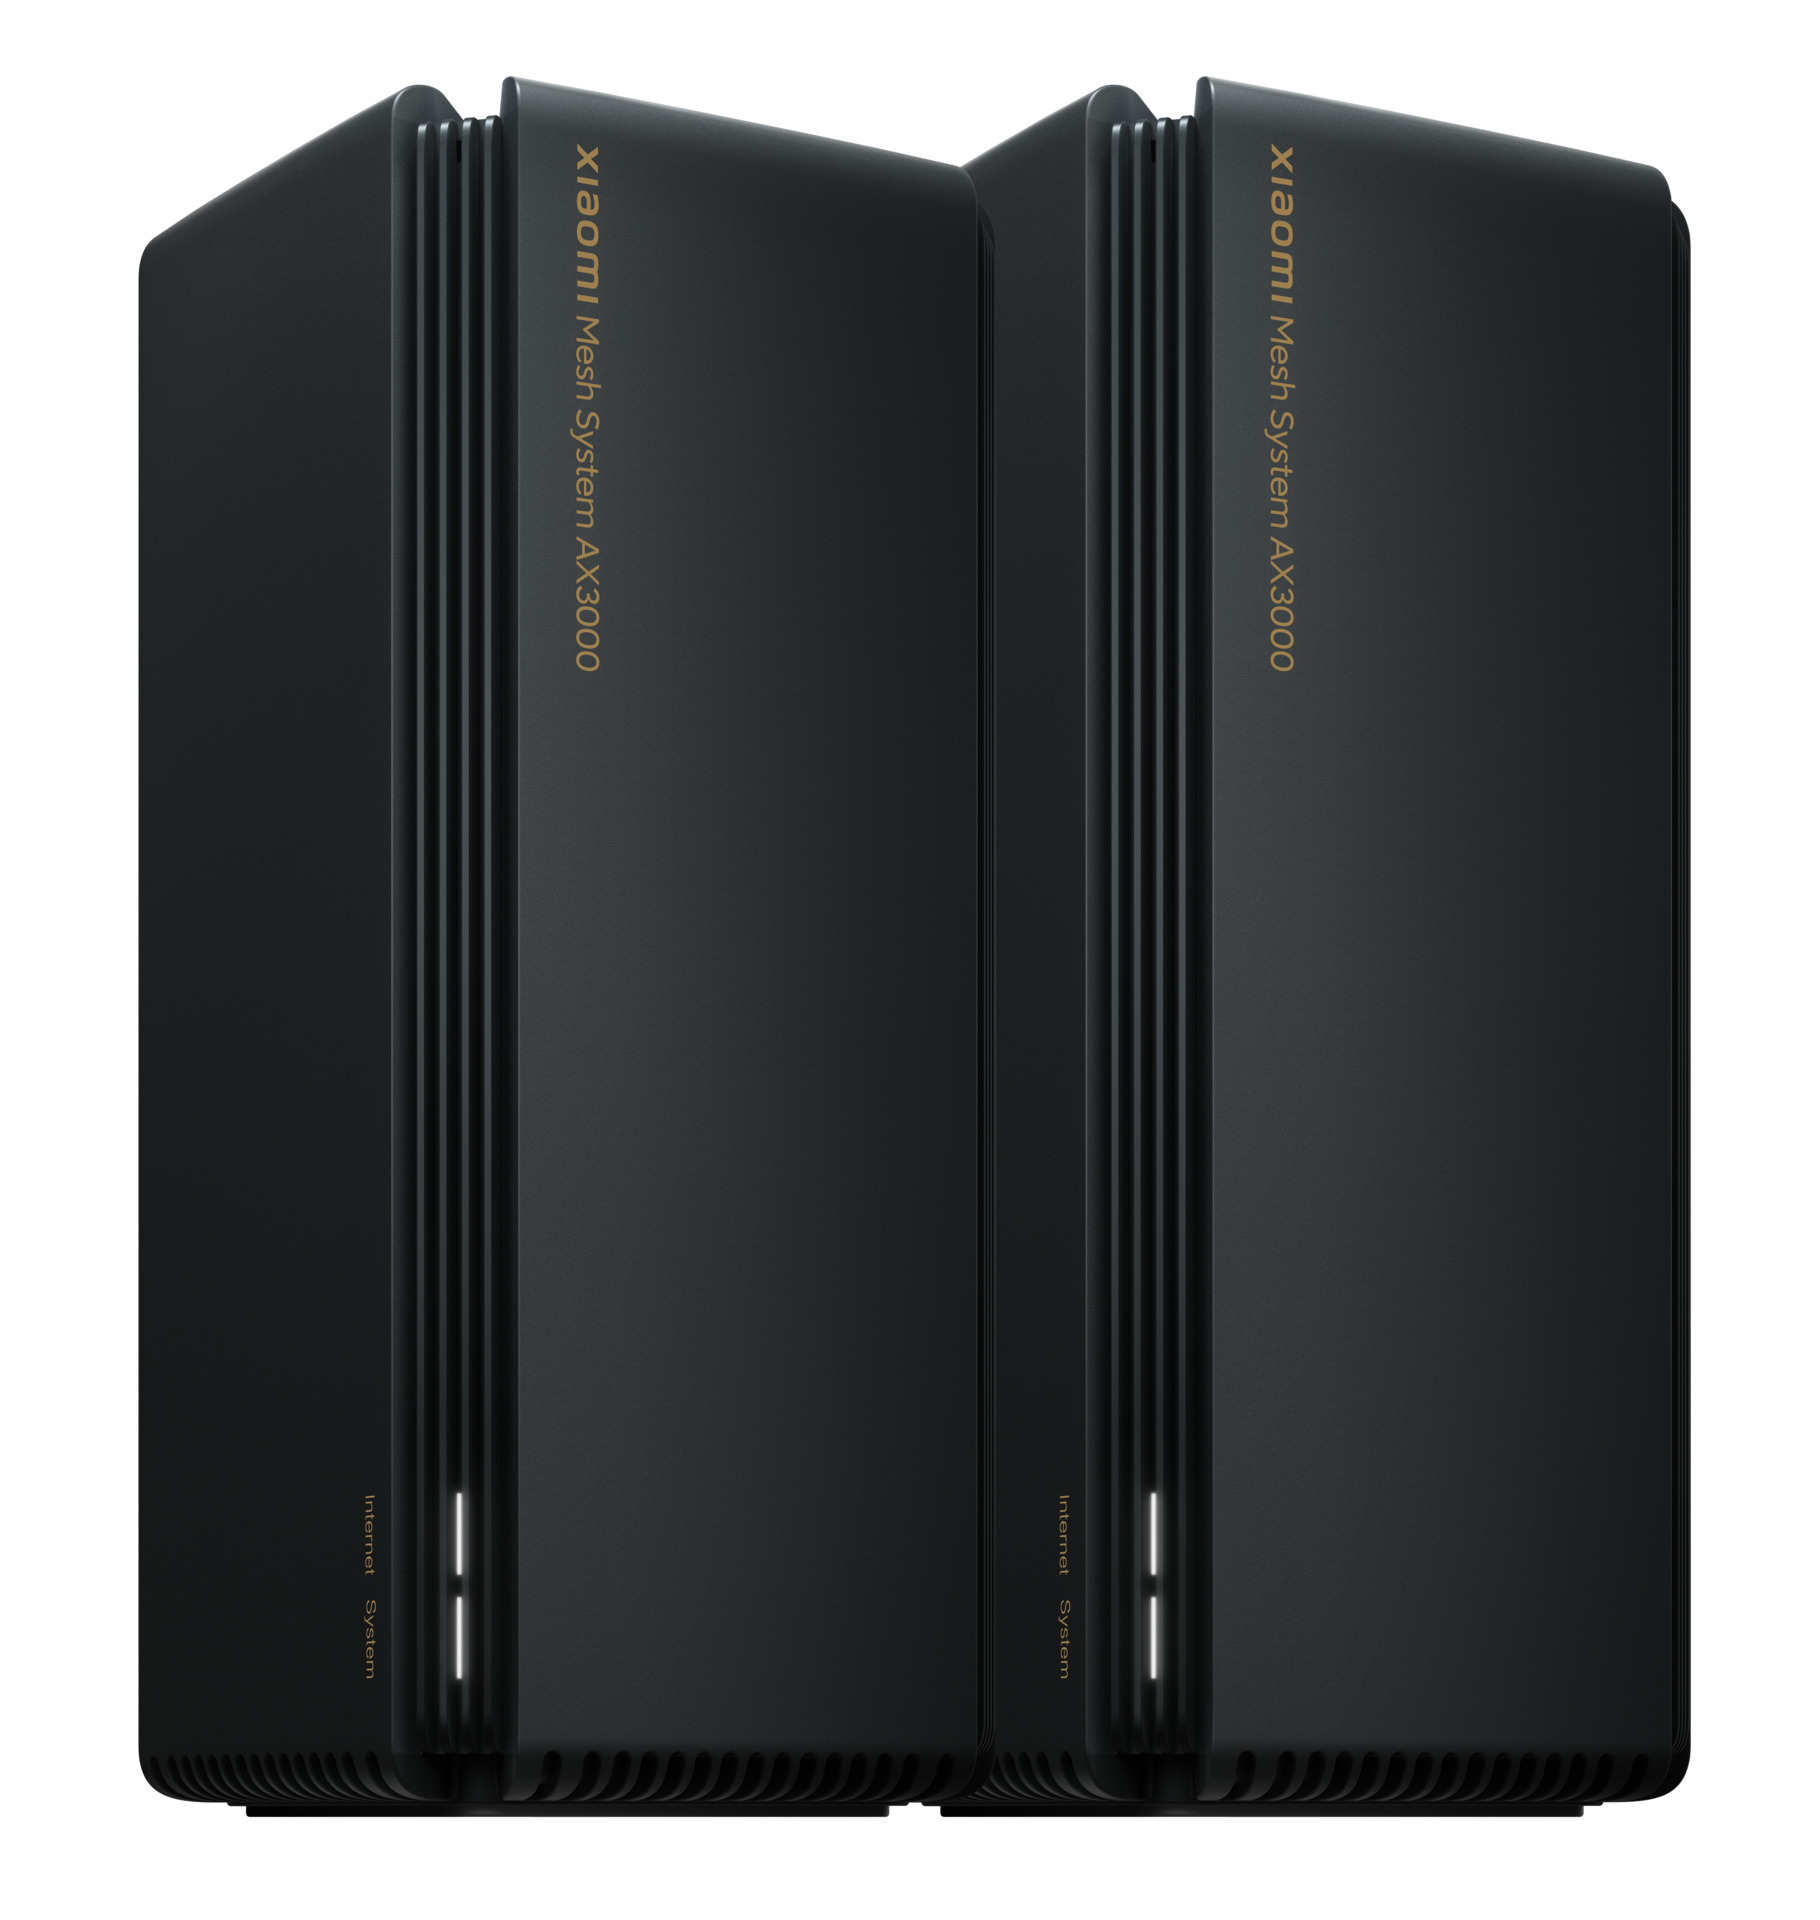 System XIAOMI Stationärer Mbit/s Router 3000 AX3000 Mesh